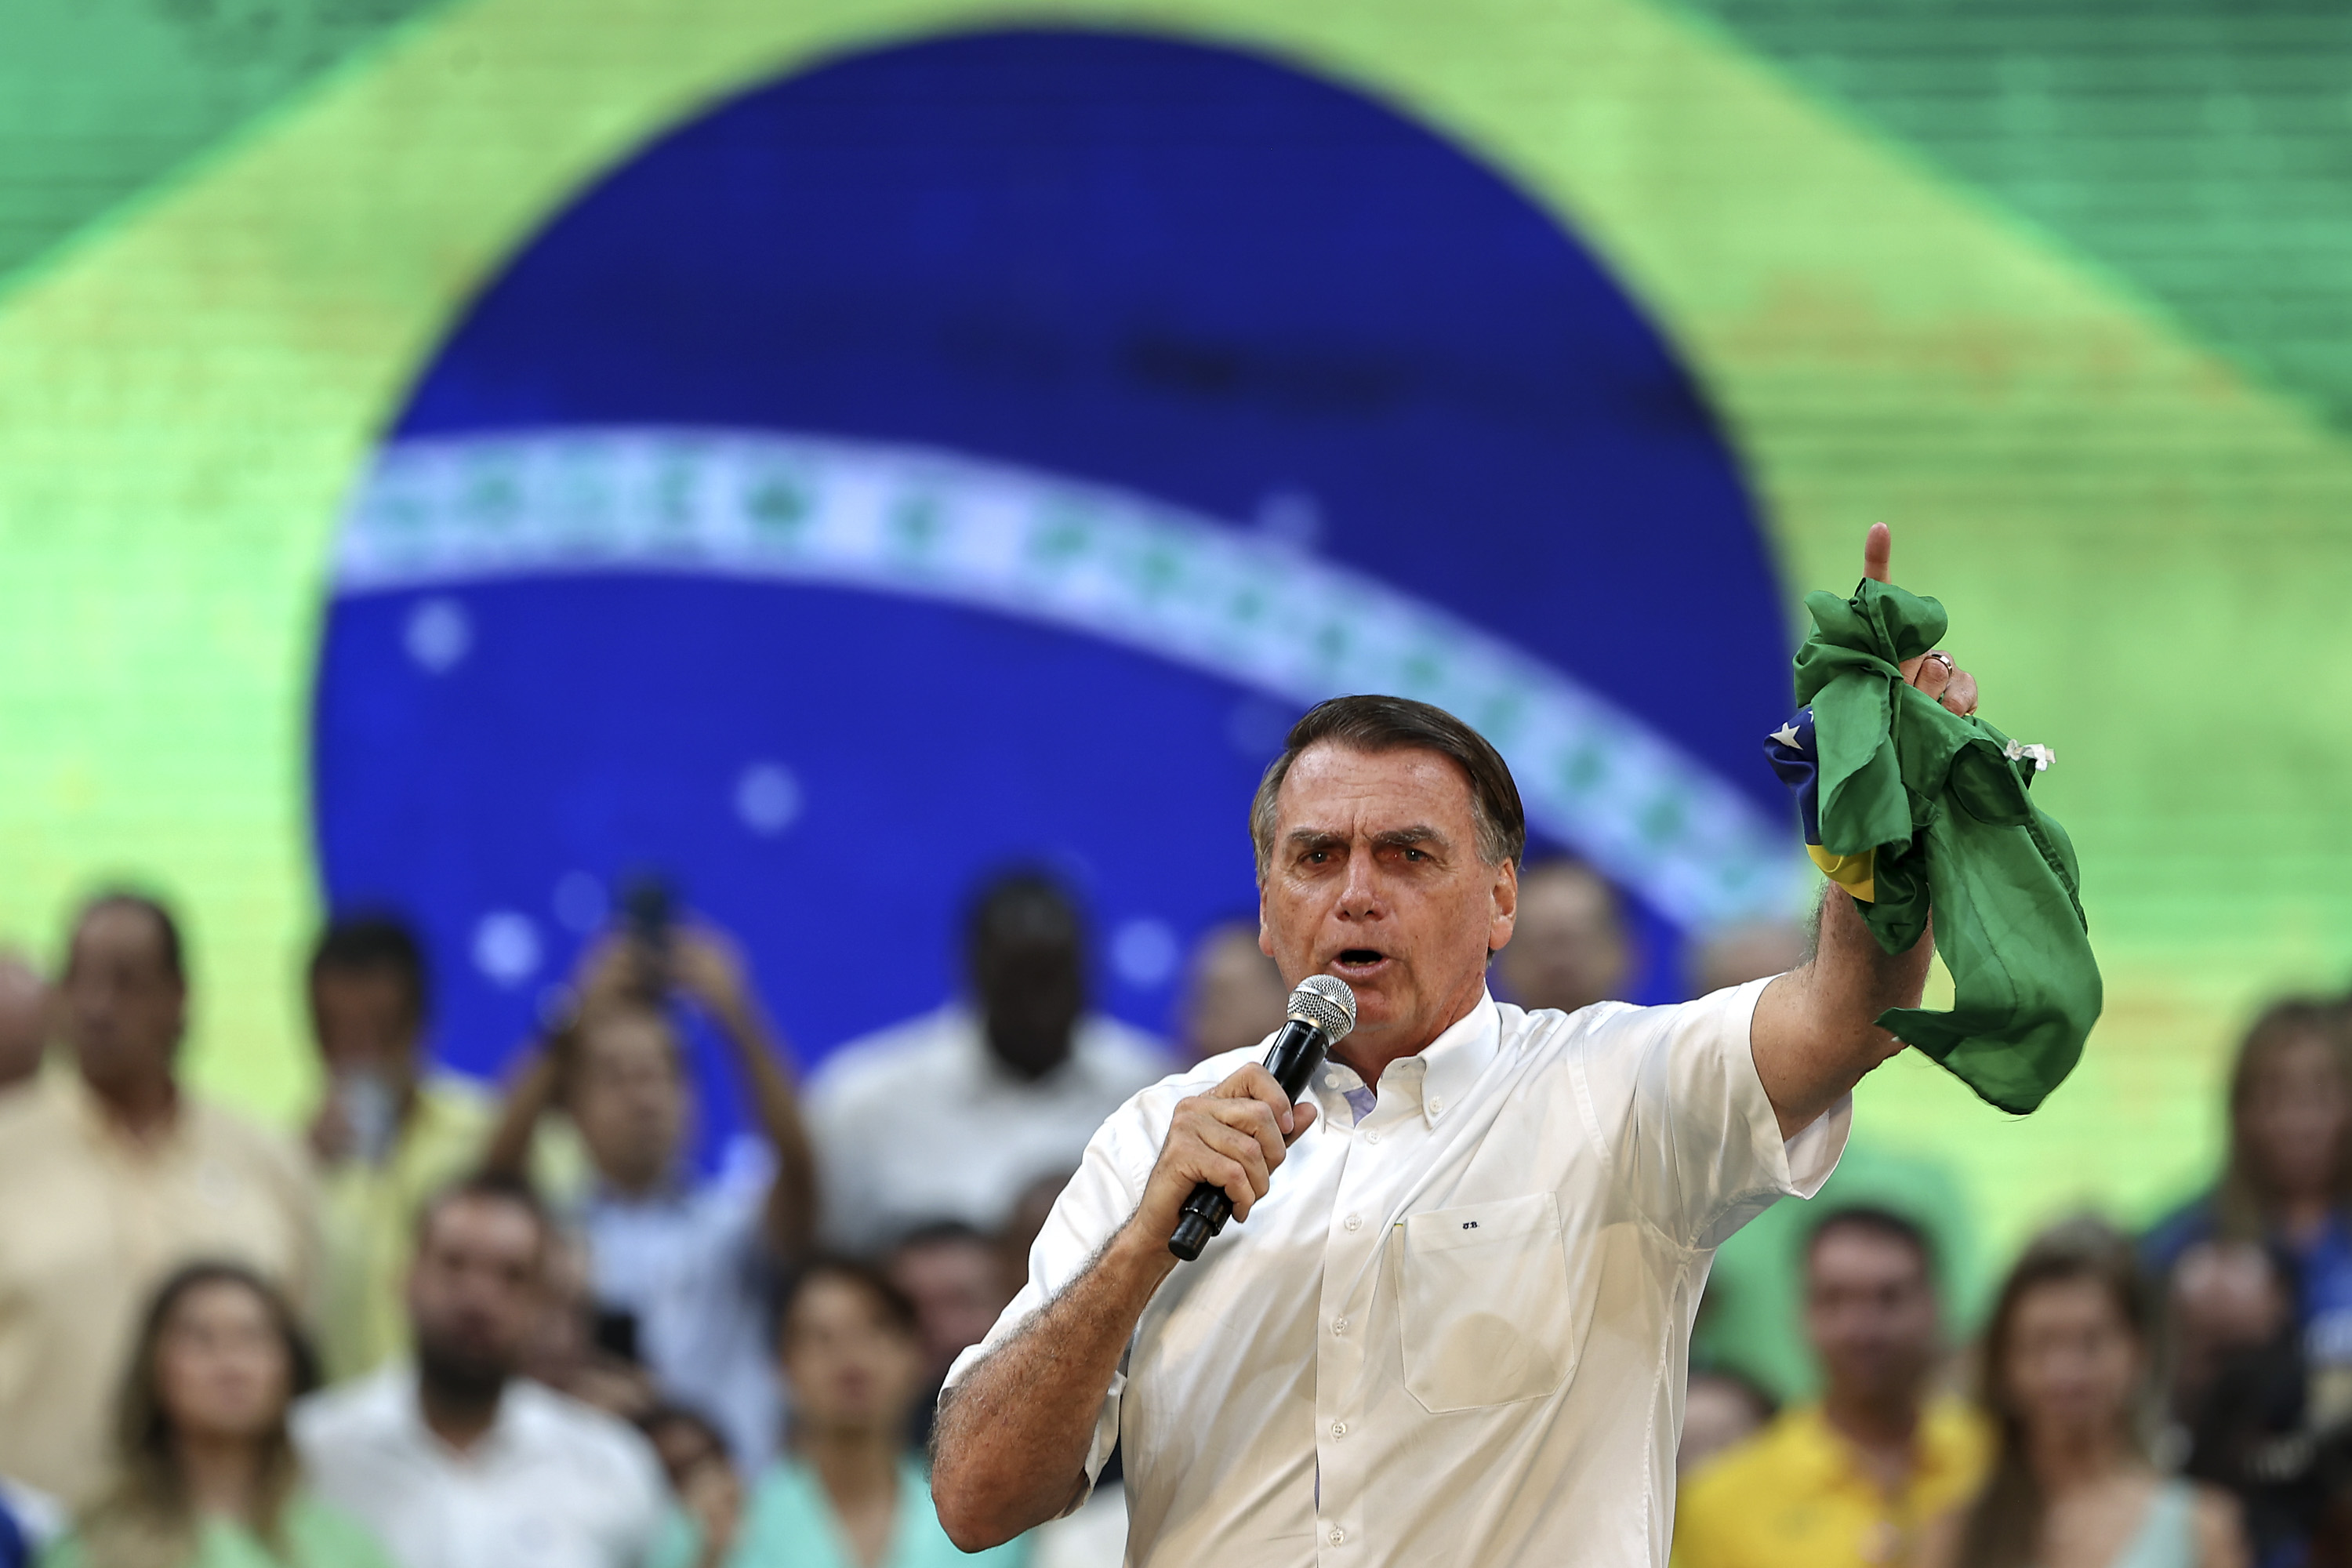 Photo of Brazil president Bolsonaro giving a public speech in front of a crowd and a Brazilian flag